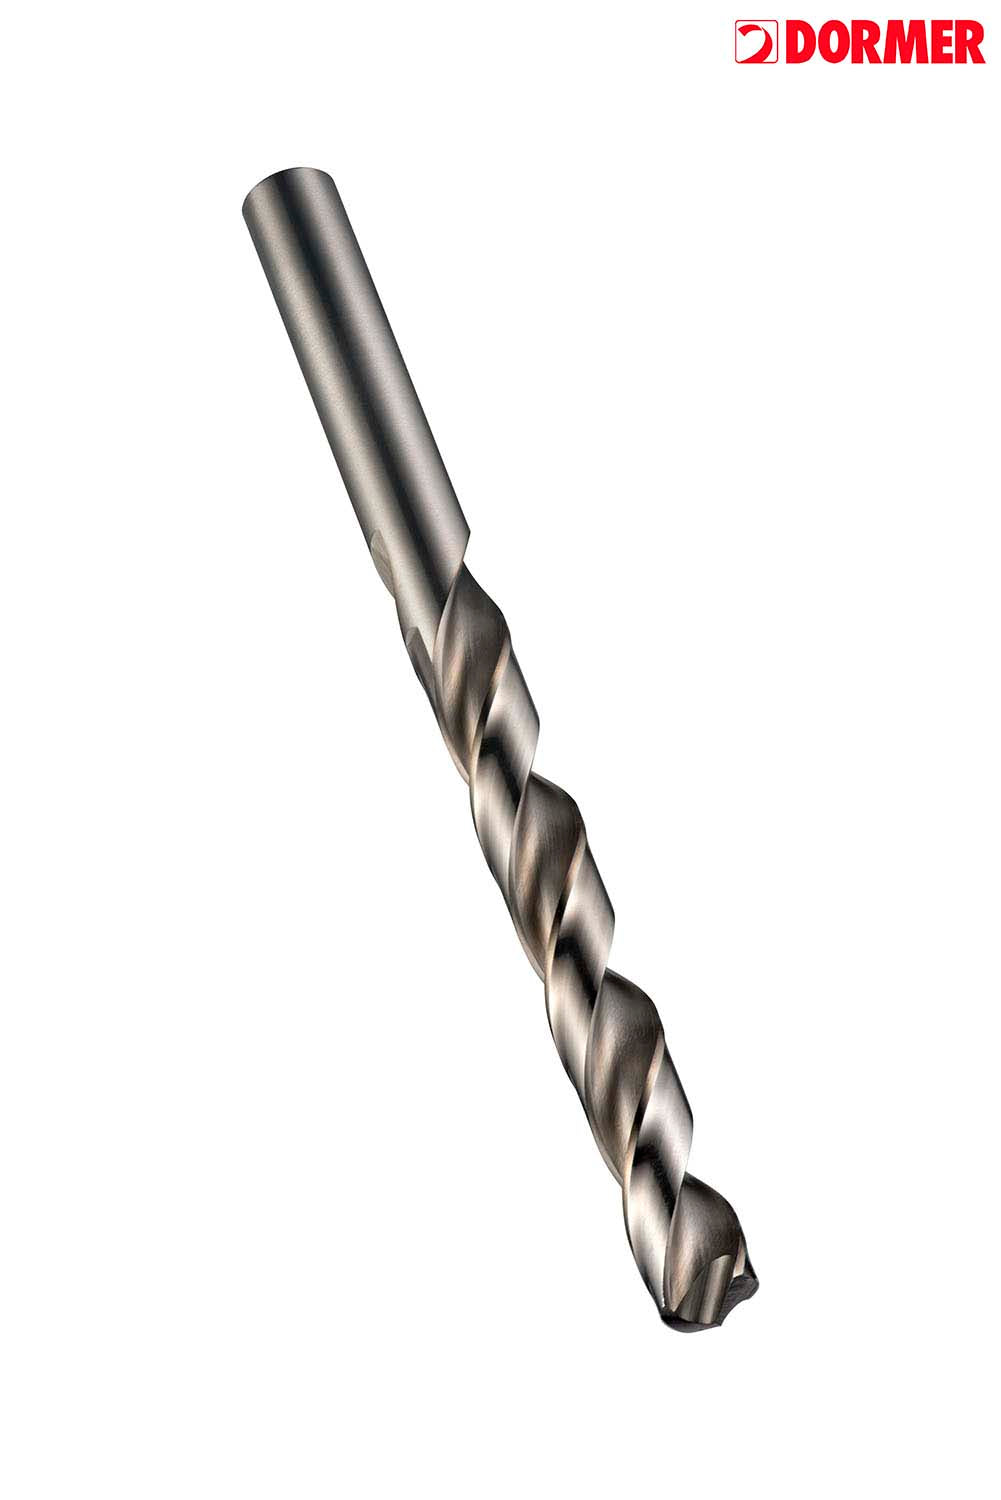 Cobalt Drill Bits 12mm for Stainless